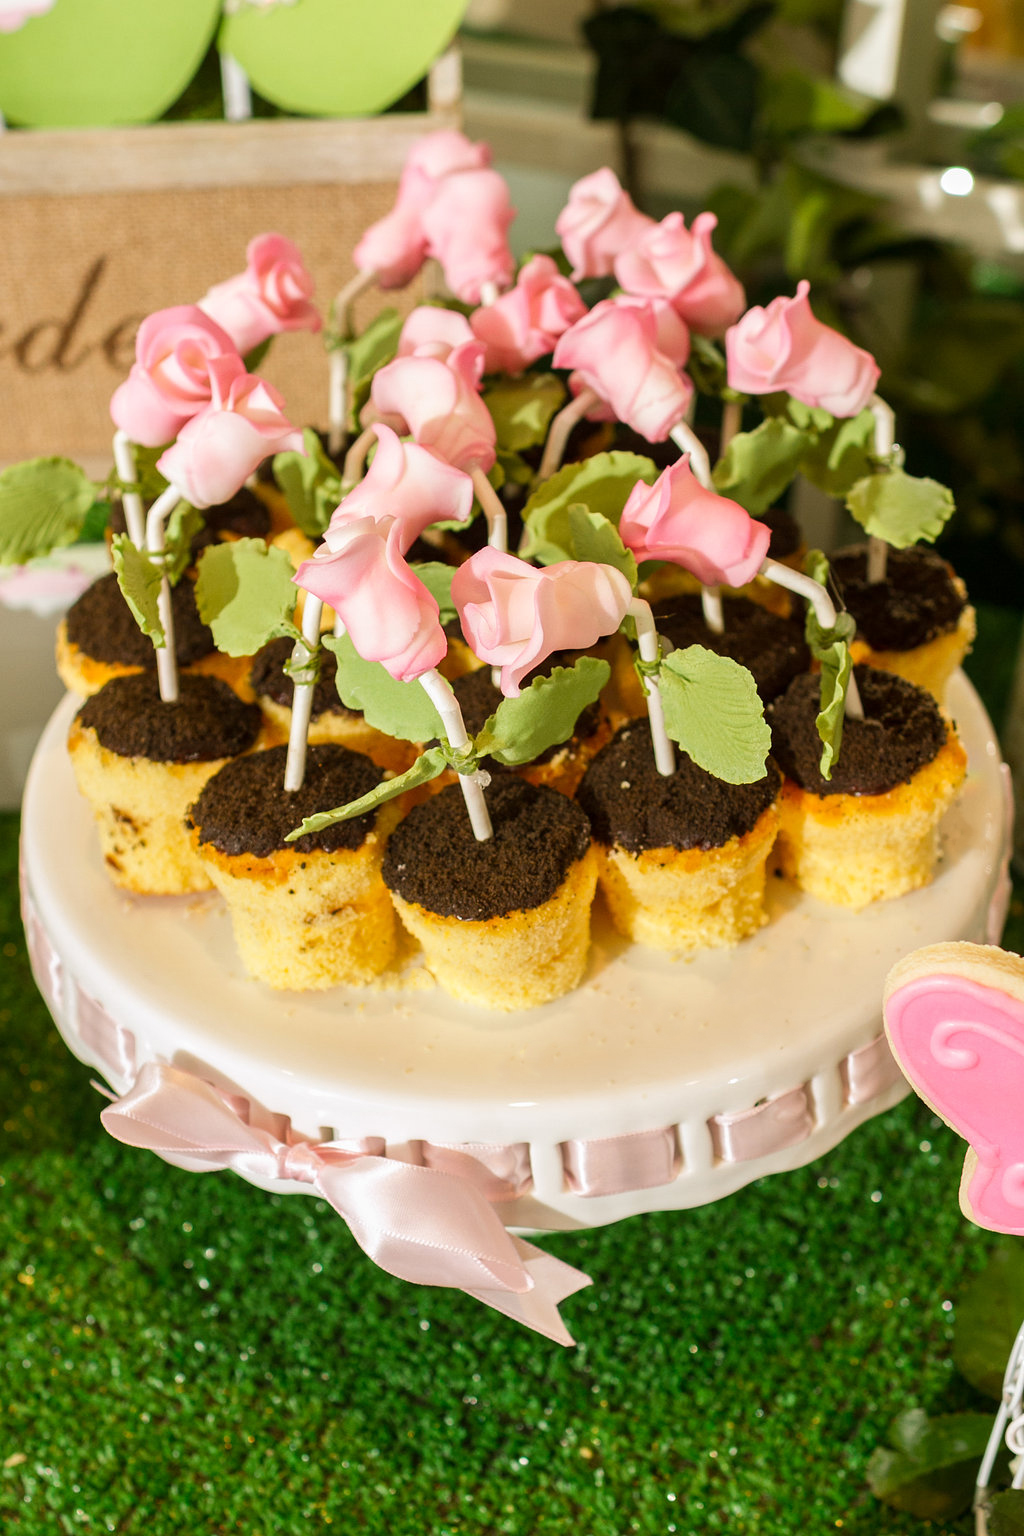 Cupcakes that Look Like Potted Roses